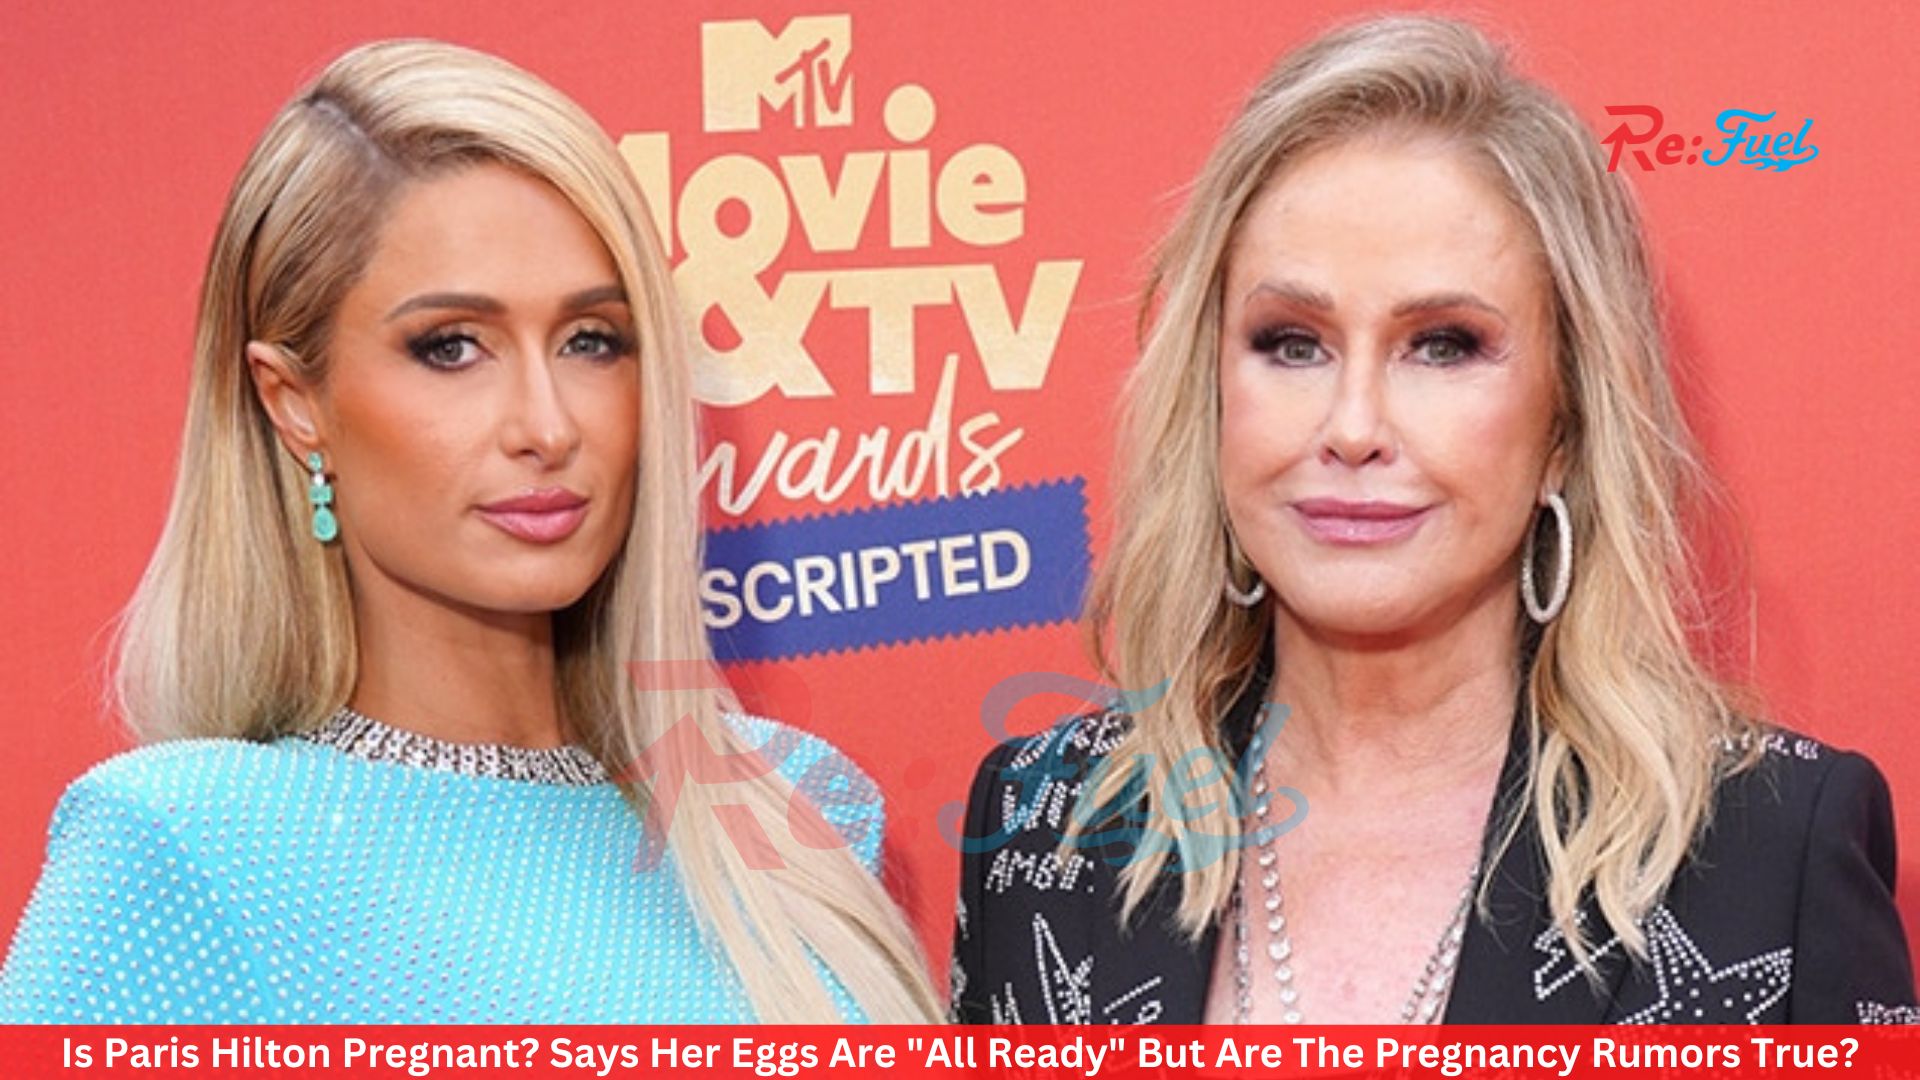 Is Paris Hilton Pregnant? Says Her Eggs Are "All Ready" But Are The Pregnancy Rumors True?